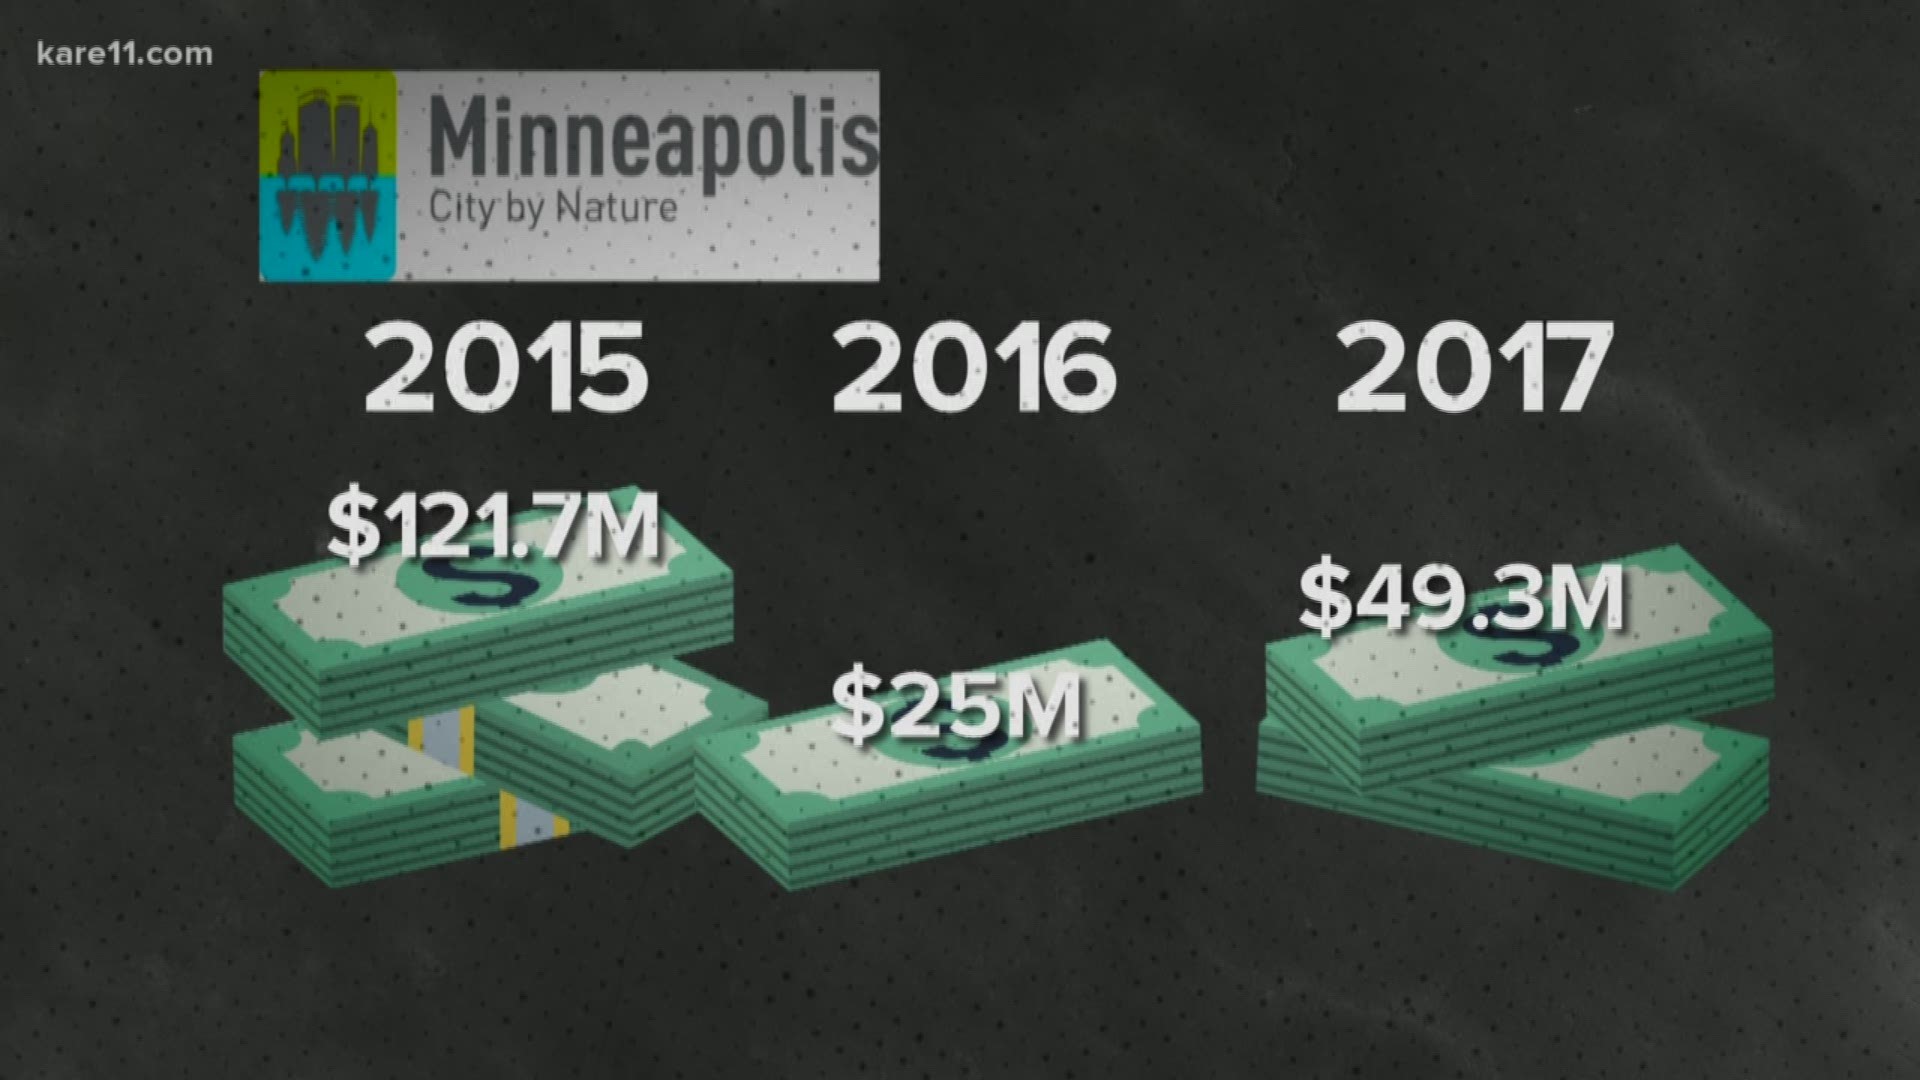 The audit states that due to "likely double-counting," Meet Minneapolis overstated its economic impact by nearly $200M over three years. https://kare11.tv/2y9aUOo